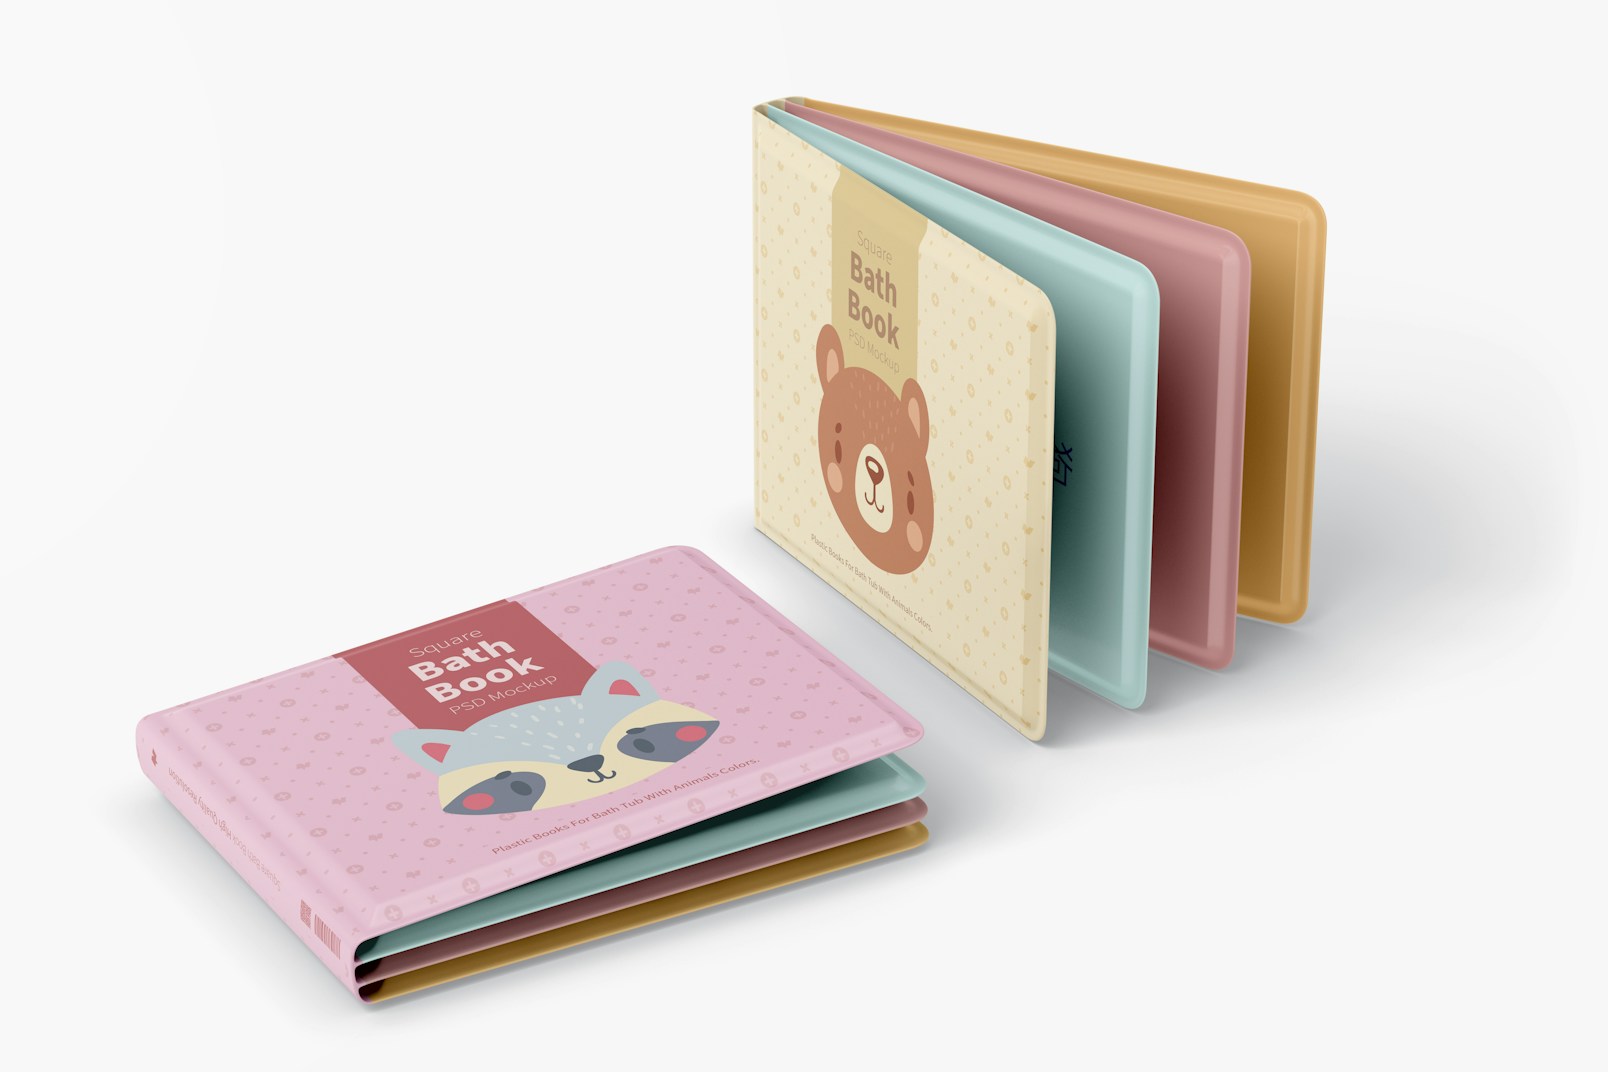 Square Bath Books Mockup, Standing and Lying